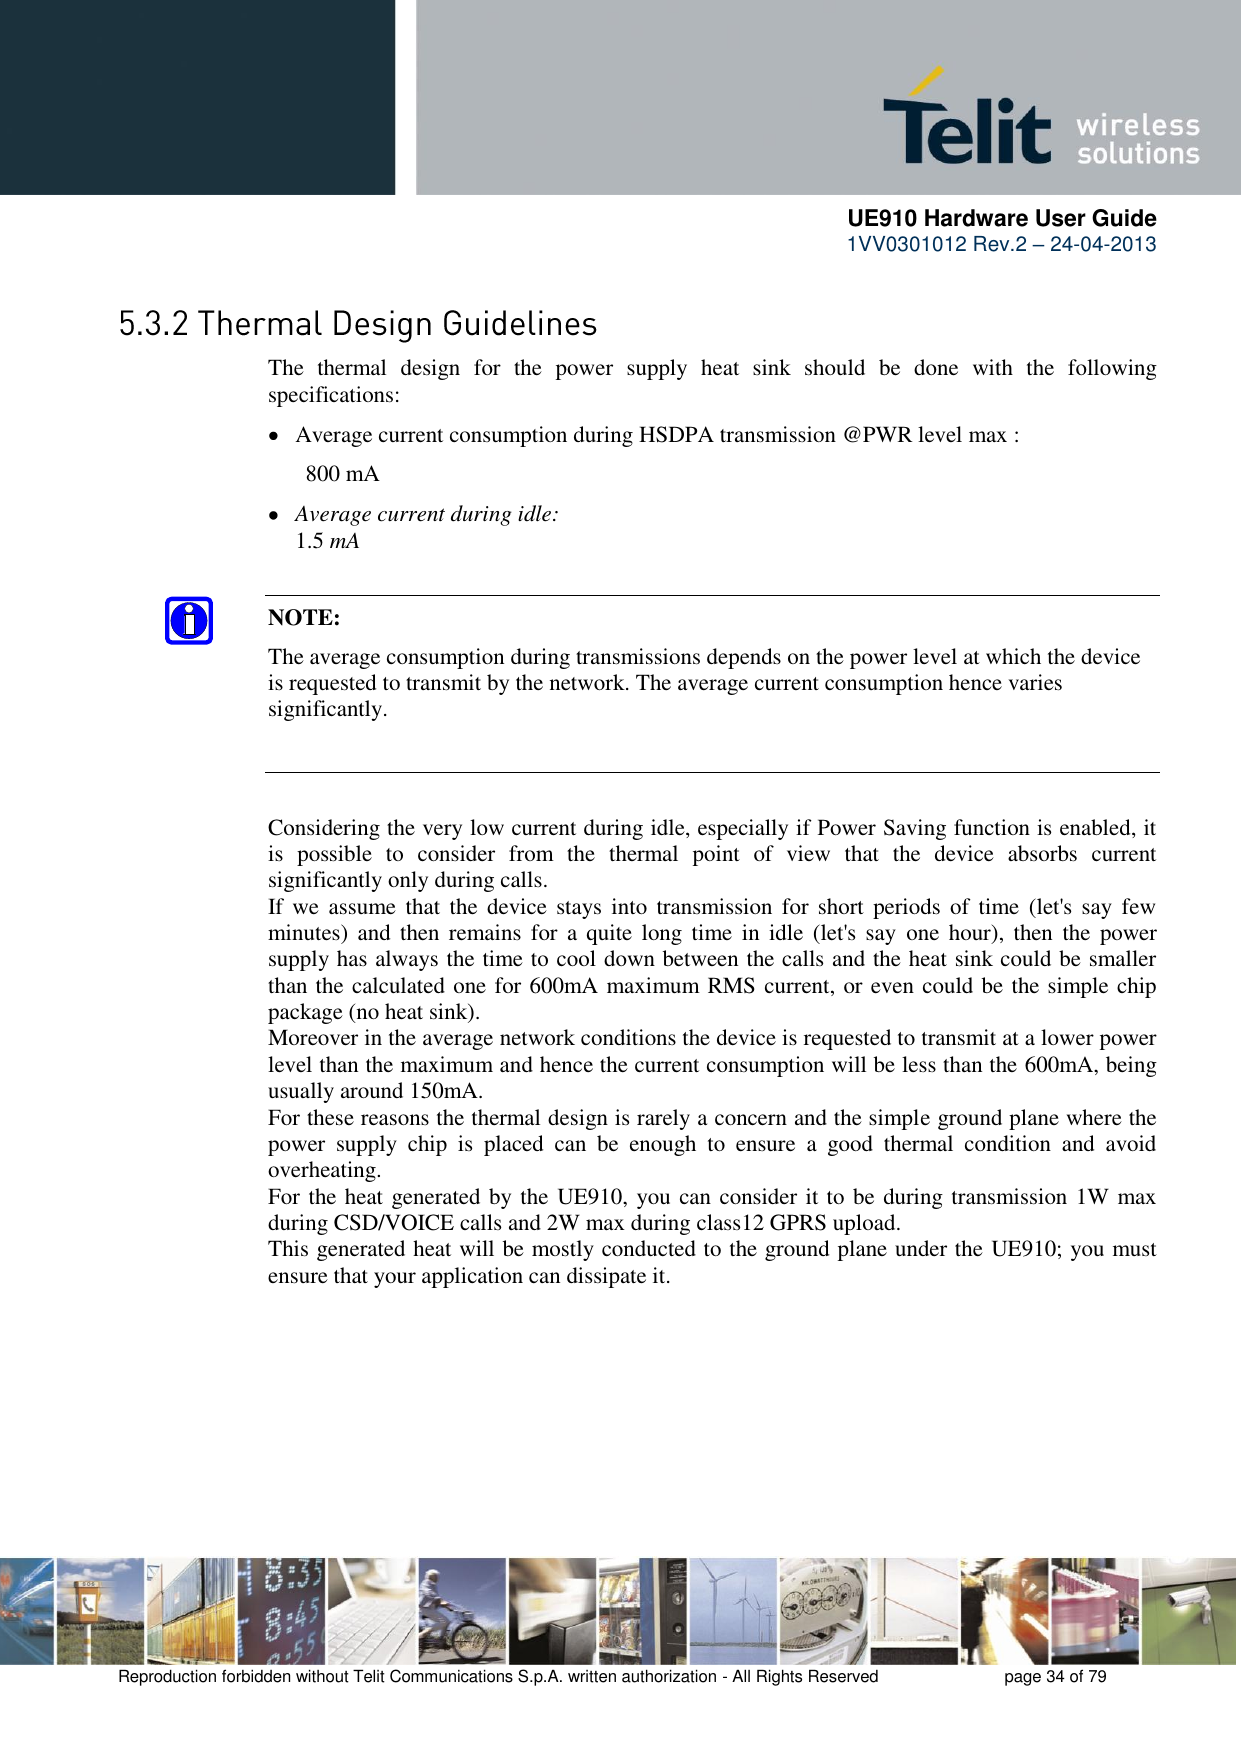      UE910 Hardware User Guide  1VV0301012 Rev.2 – 24-04-2013    Reproduction forbidden without Telit Communications S.p.A. written authorization - All Rights Reserved    page 34 of 79   The  thermal  design  for  the  power  supply  heat  sink  should  be  done  with  the  following specifications:  Average current consumption during HSDPA transmission @PWR level max :   800 mA  Average current during idle:   1.5 mA NOTE: The average consumption during transmissions depends on the power level at which the device is requested to transmit by the network. The average current consumption hence varies significantly. Considering the very low current during idle, especially if Power Saving function is enabled, it is  possible  to  consider  from  the  thermal  point  of  view  that  the  device  absorbs  current significantly only during calls.  If we  assume that the device  stays into  transmission for short  periods of  time  (let&apos;s  say  few minutes) and  then remains  for  a  quite long  time  in  idle (let&apos;s  say  one  hour), then the  power supply has always the time to cool down between the calls and the heat sink could be smaller than the calculated one for 600mA maximum RMS current, or even could be the simple chip package (no heat sink). Moreover in the average network conditions the device is requested to transmit at a lower power level than the maximum and hence the current consumption will be less than the 600mA, being usually around 150mA. For these reasons the thermal design is rarely a concern and the simple ground plane where the power  supply  chip  is  placed  can  be  enough  to  ensure  a  good  thermal  condition  and  avoid overheating.  For the heat generated by the UE910, you can consider it to be during transmission 1W max during CSD/VOICE calls and 2W max during class12 GPRS upload.  This generated heat will be mostly conducted to the ground plane under the UE910; you must ensure that your application can dissipate it.  